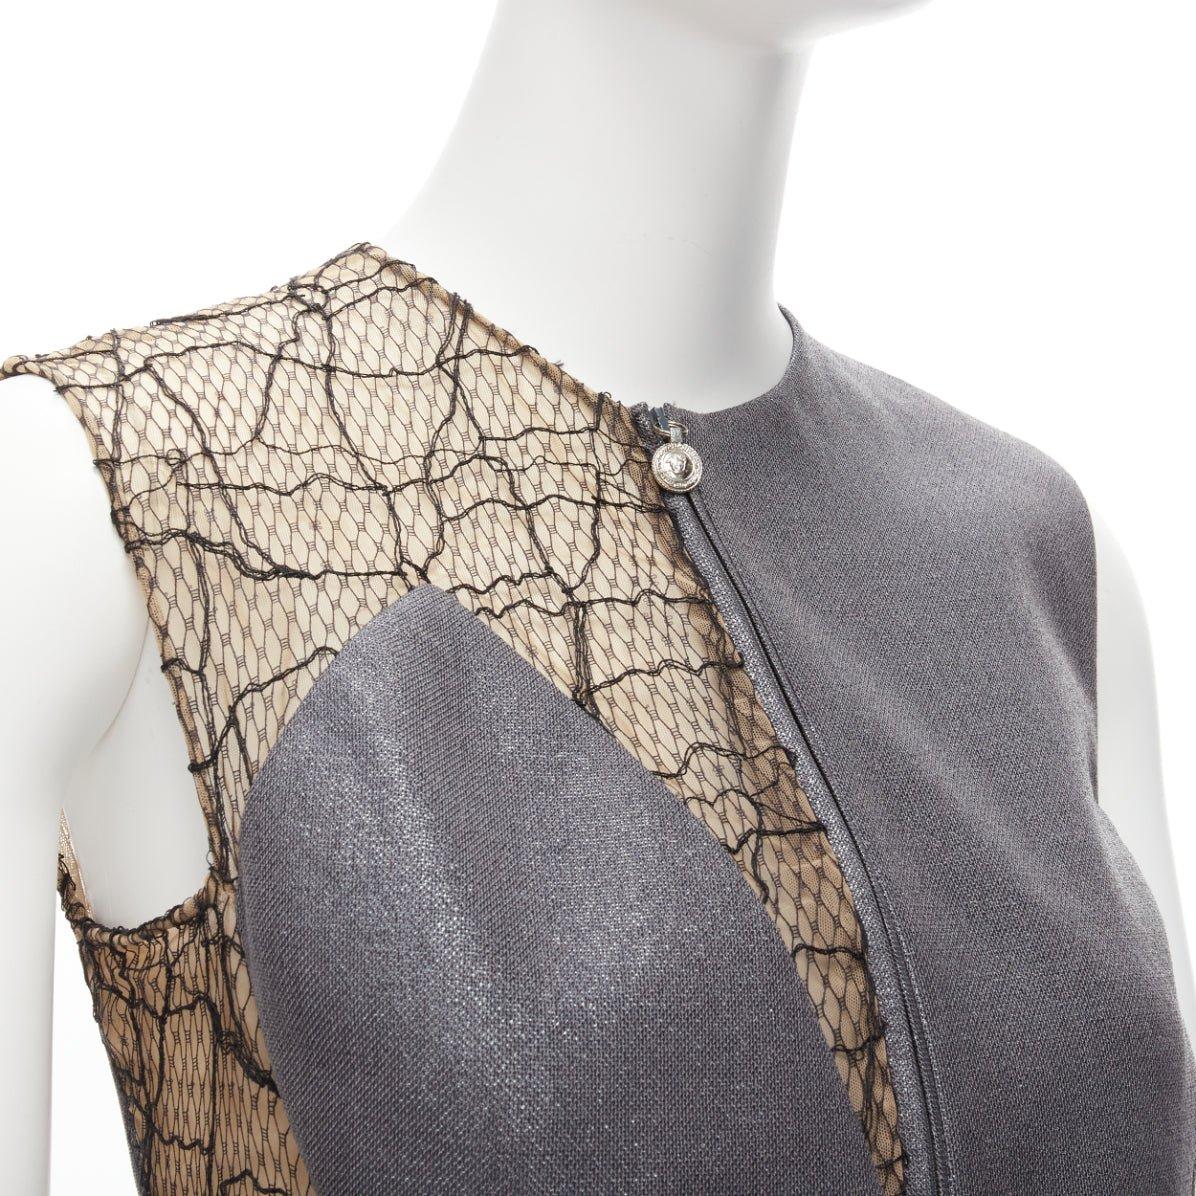 GIANNI VERSACE Vintage Runway grey lurex nude lace mesh illusion panel vest pants suit set IT38 XS
Reference: TGAS/D00447
Brand: Gianni Versace
Designer: Gianni Versace
Material: Wool, Blend
Color: Grey, Black
Pattern: Solid
Closure: Zip
Lining: